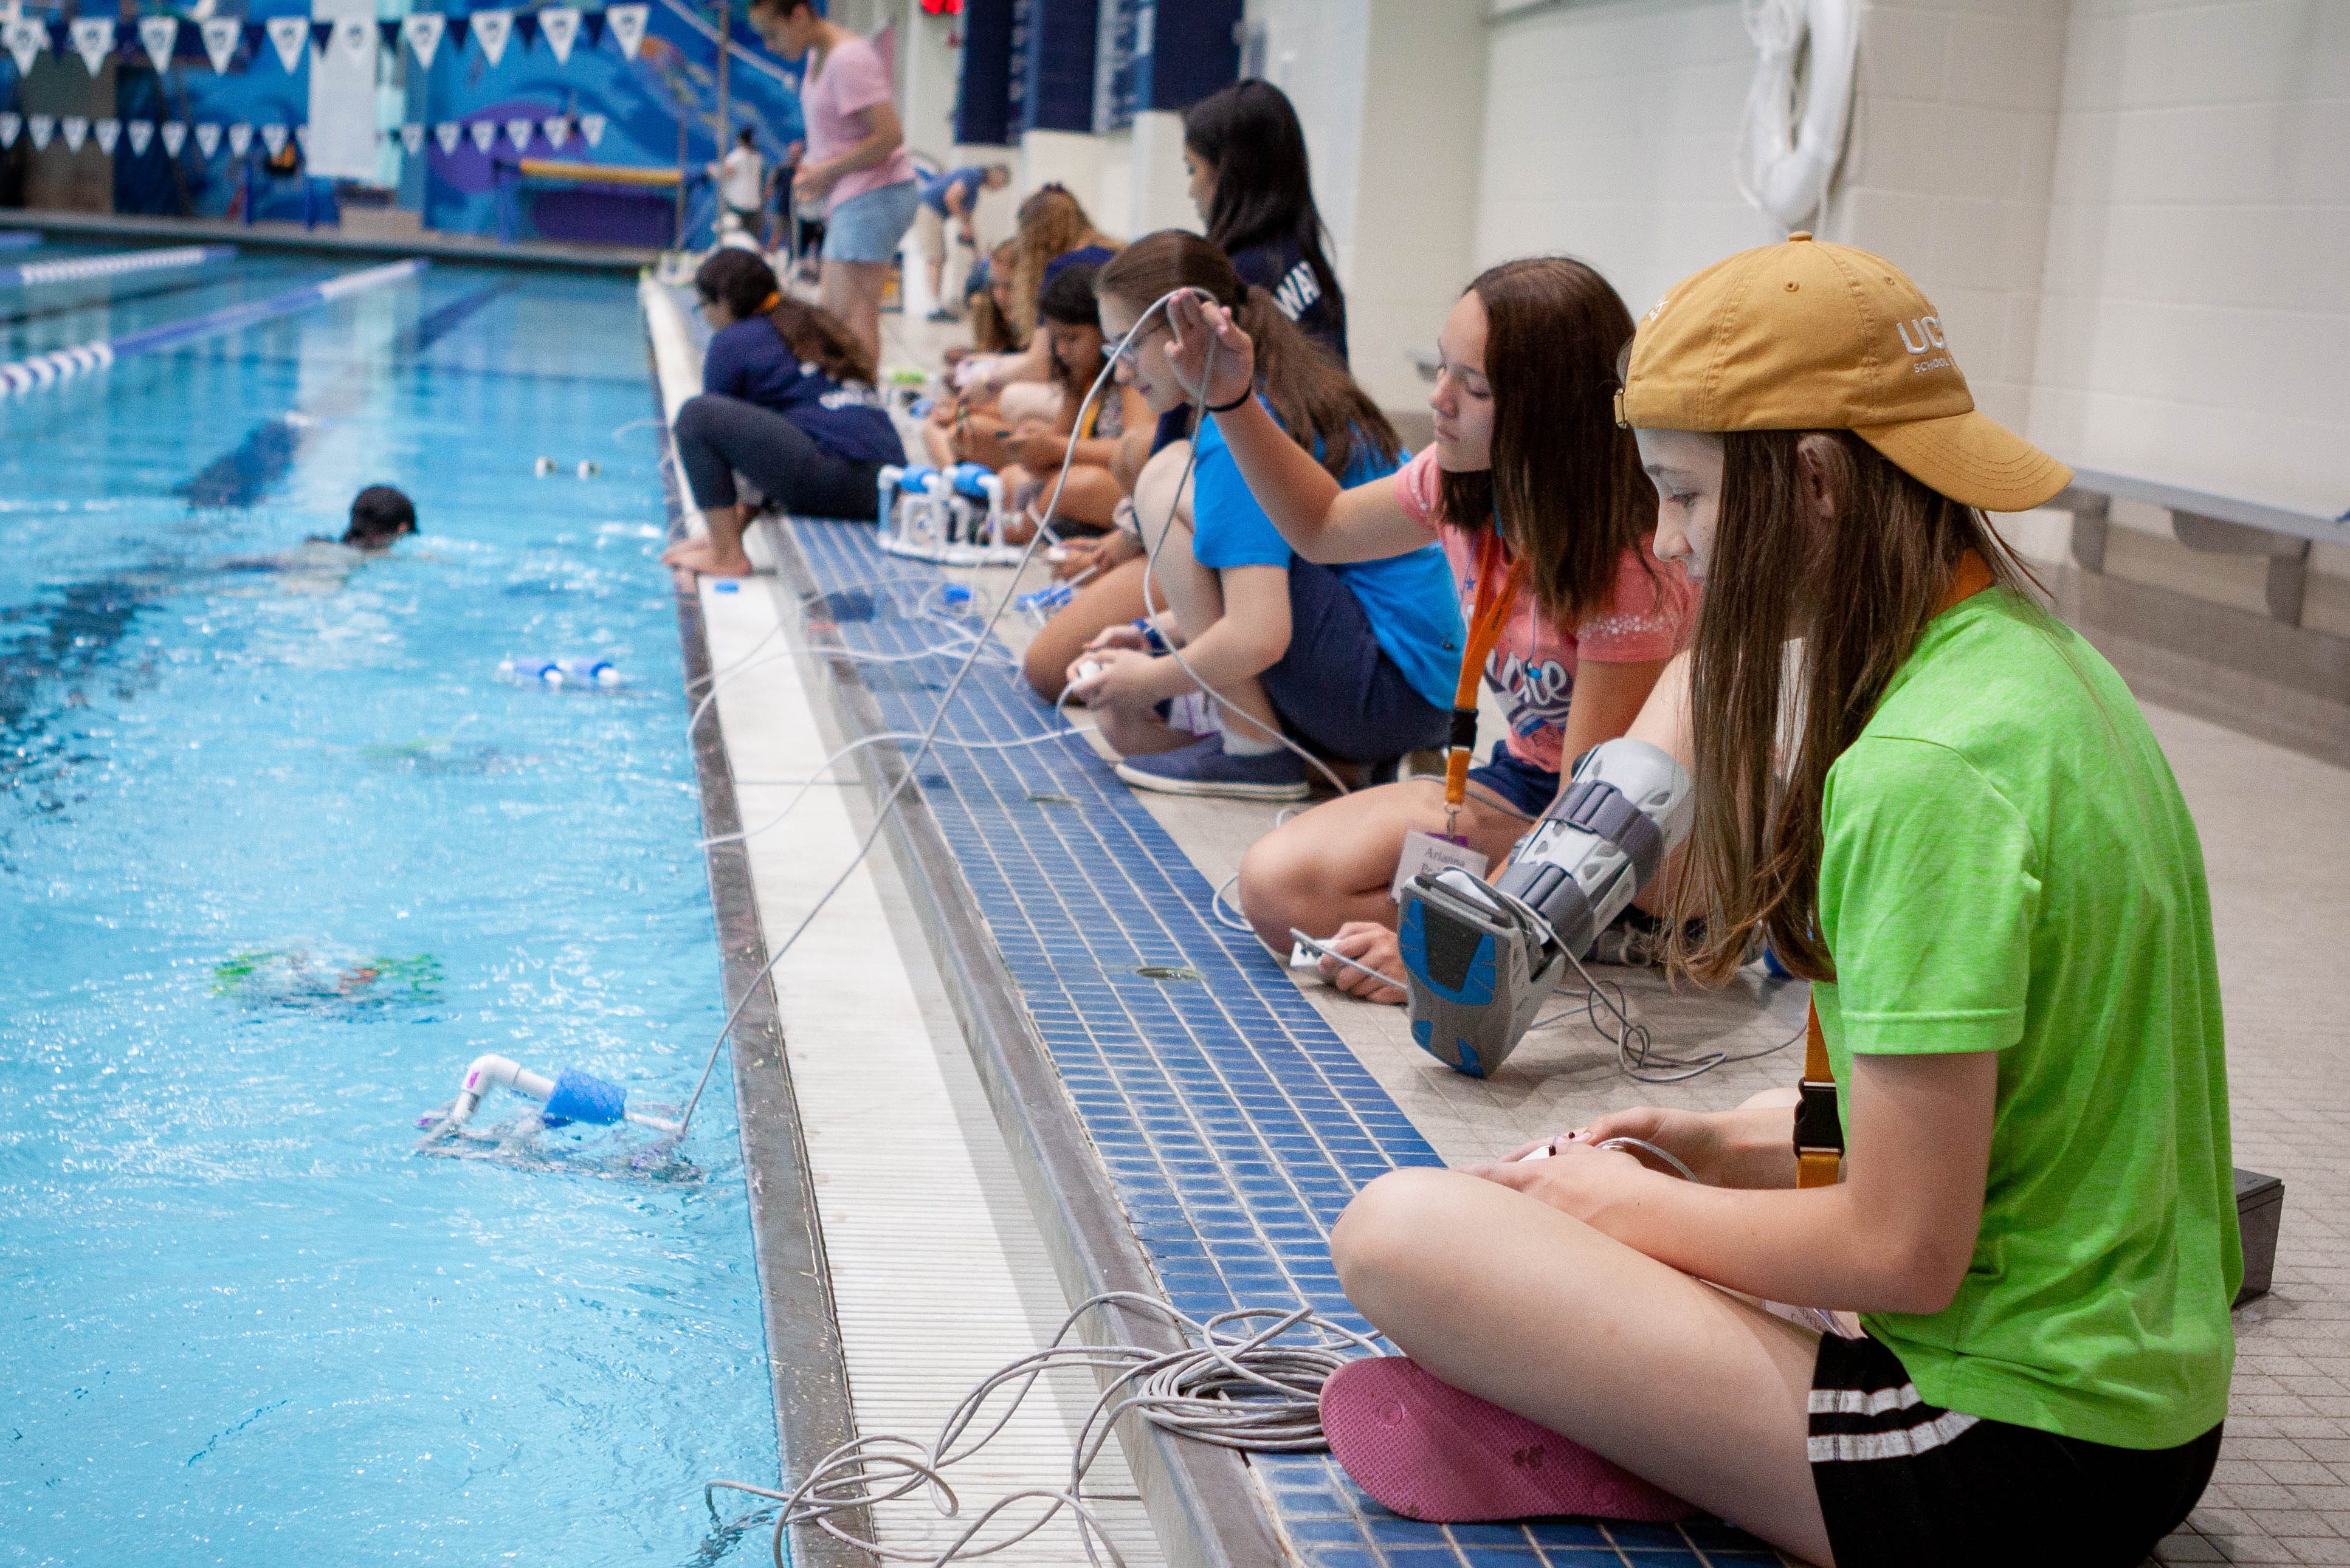 A group of SPARK campers work on their underwater robots in the UConn Wolff-Zackin Natatorium during the summer of 2019. SPARK seeks to mentor and encourage 7th-9th grade females to enter the STEM fields through overnight summer camps. (UConn Photo/Christopher LaRosa)